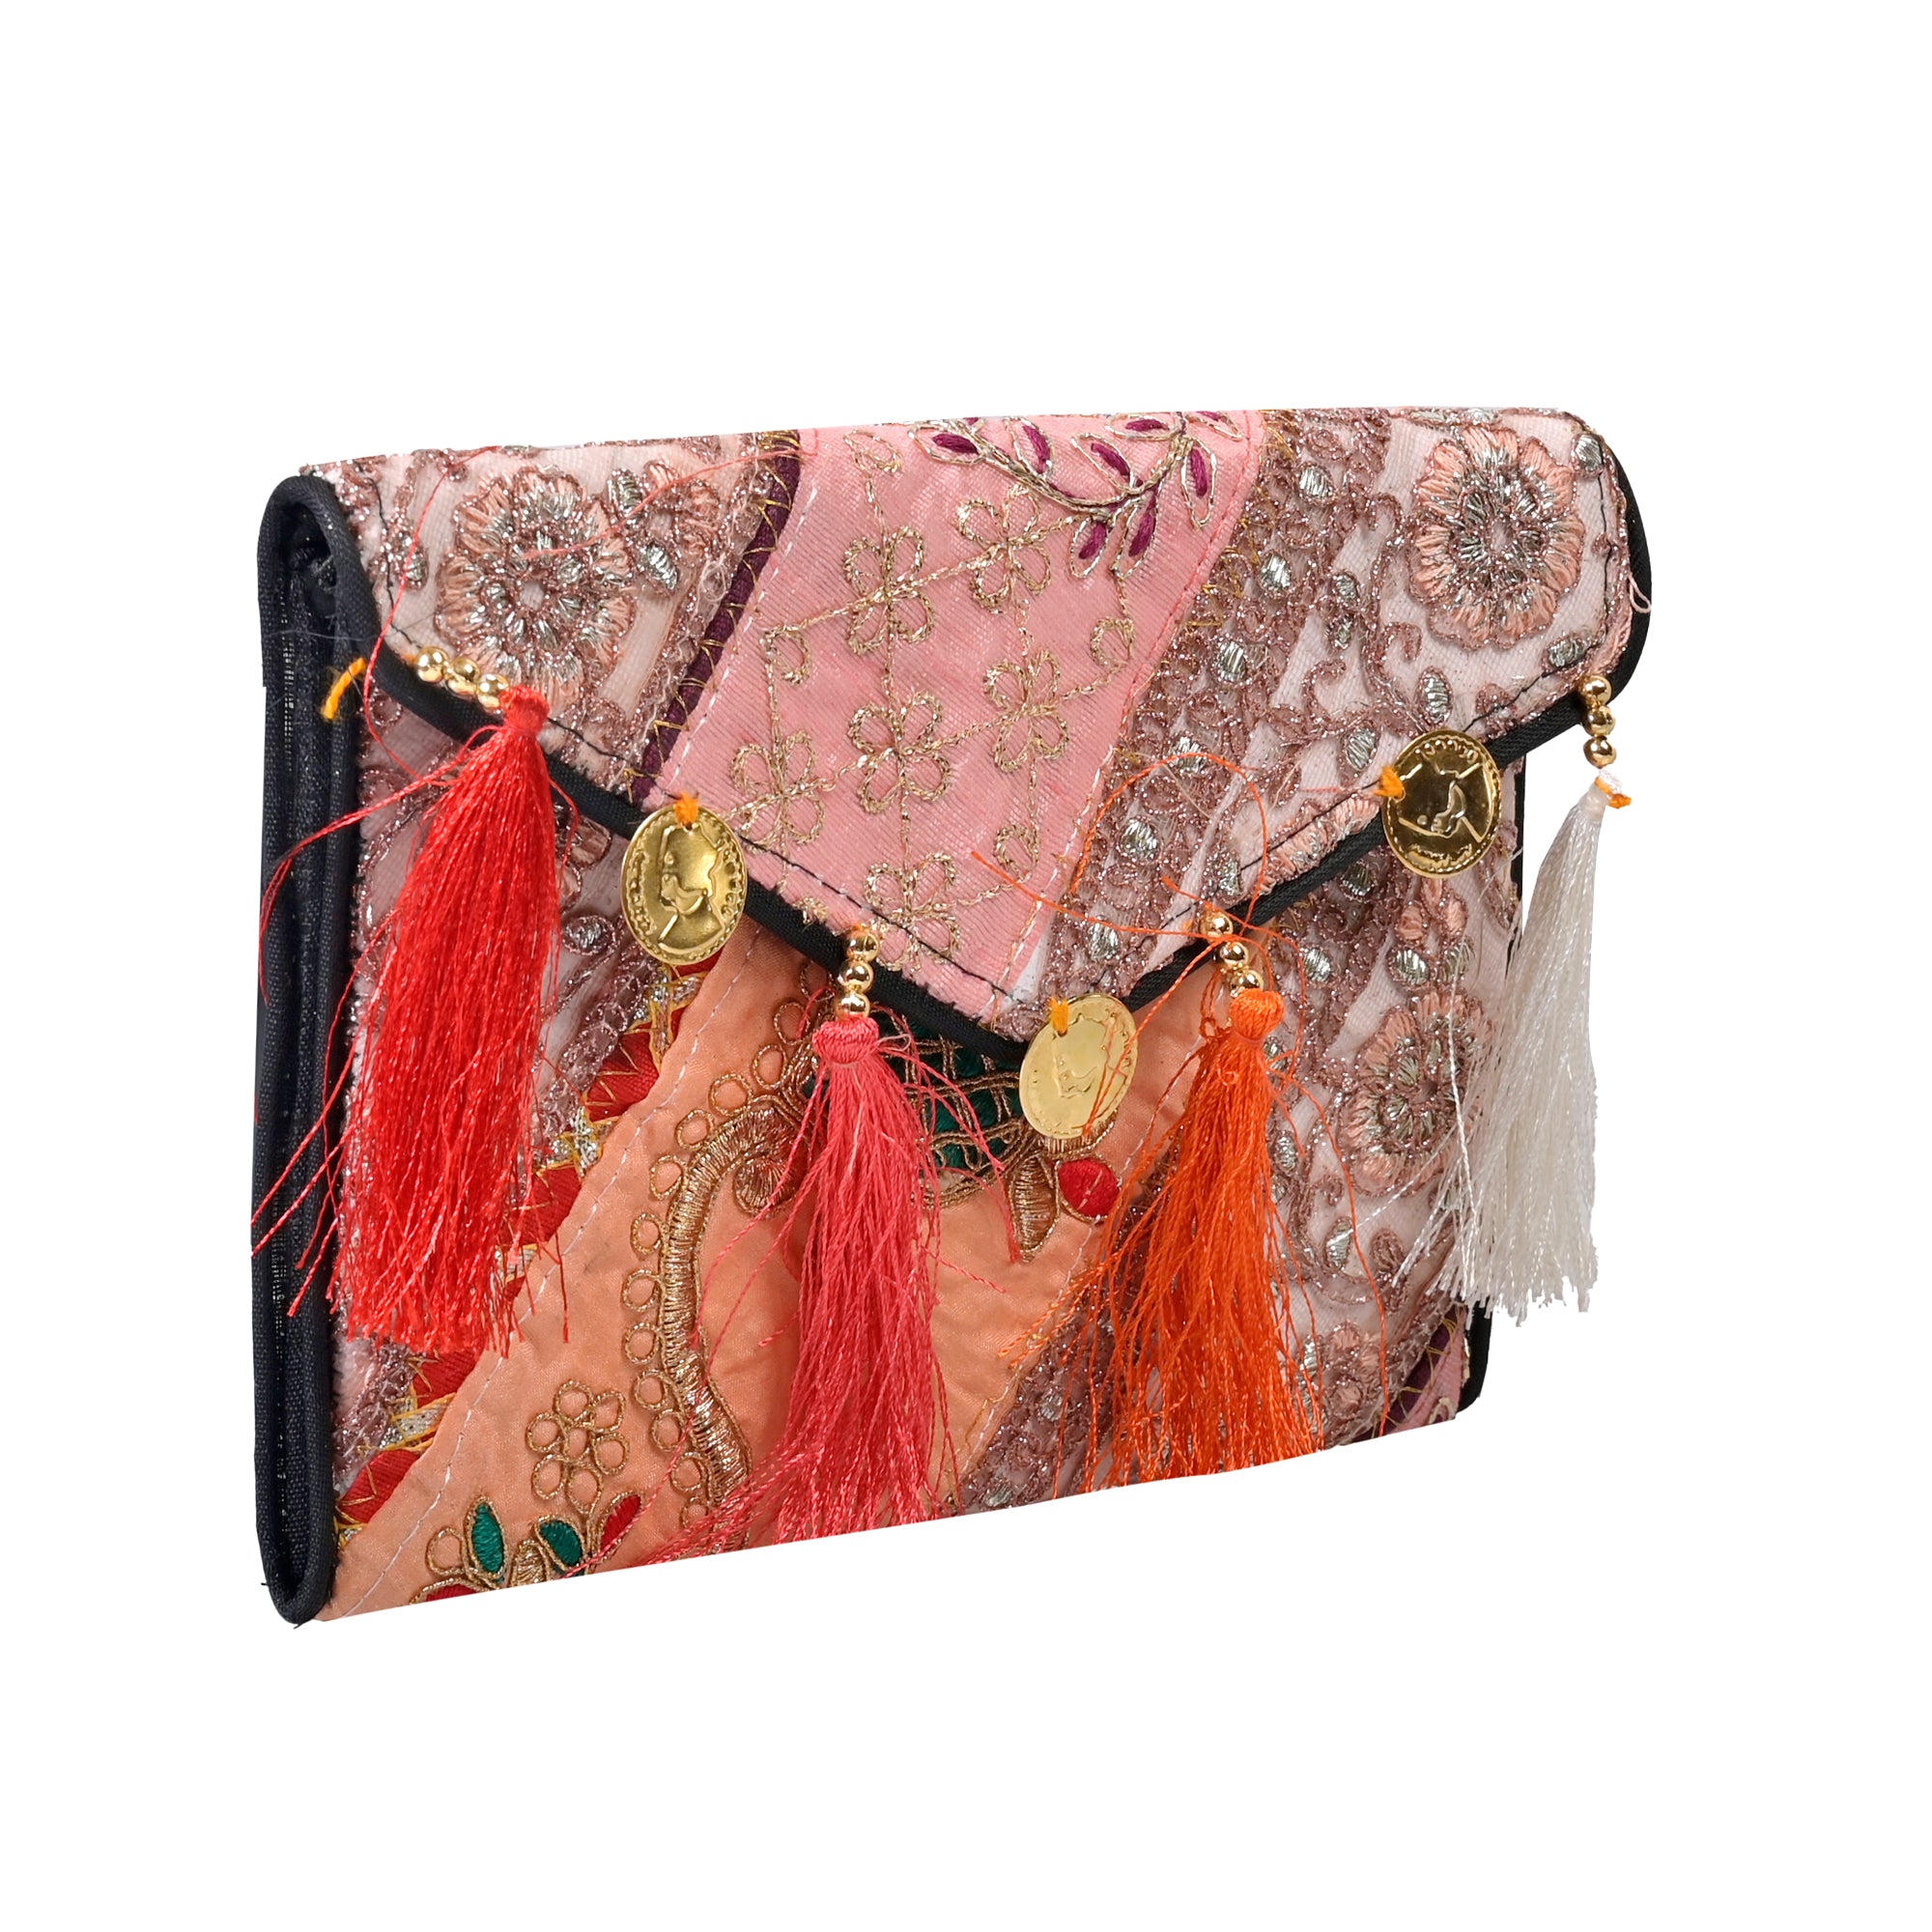 Traditional Zari Sling Bag For Women Rajasthani Embroidery Purse,